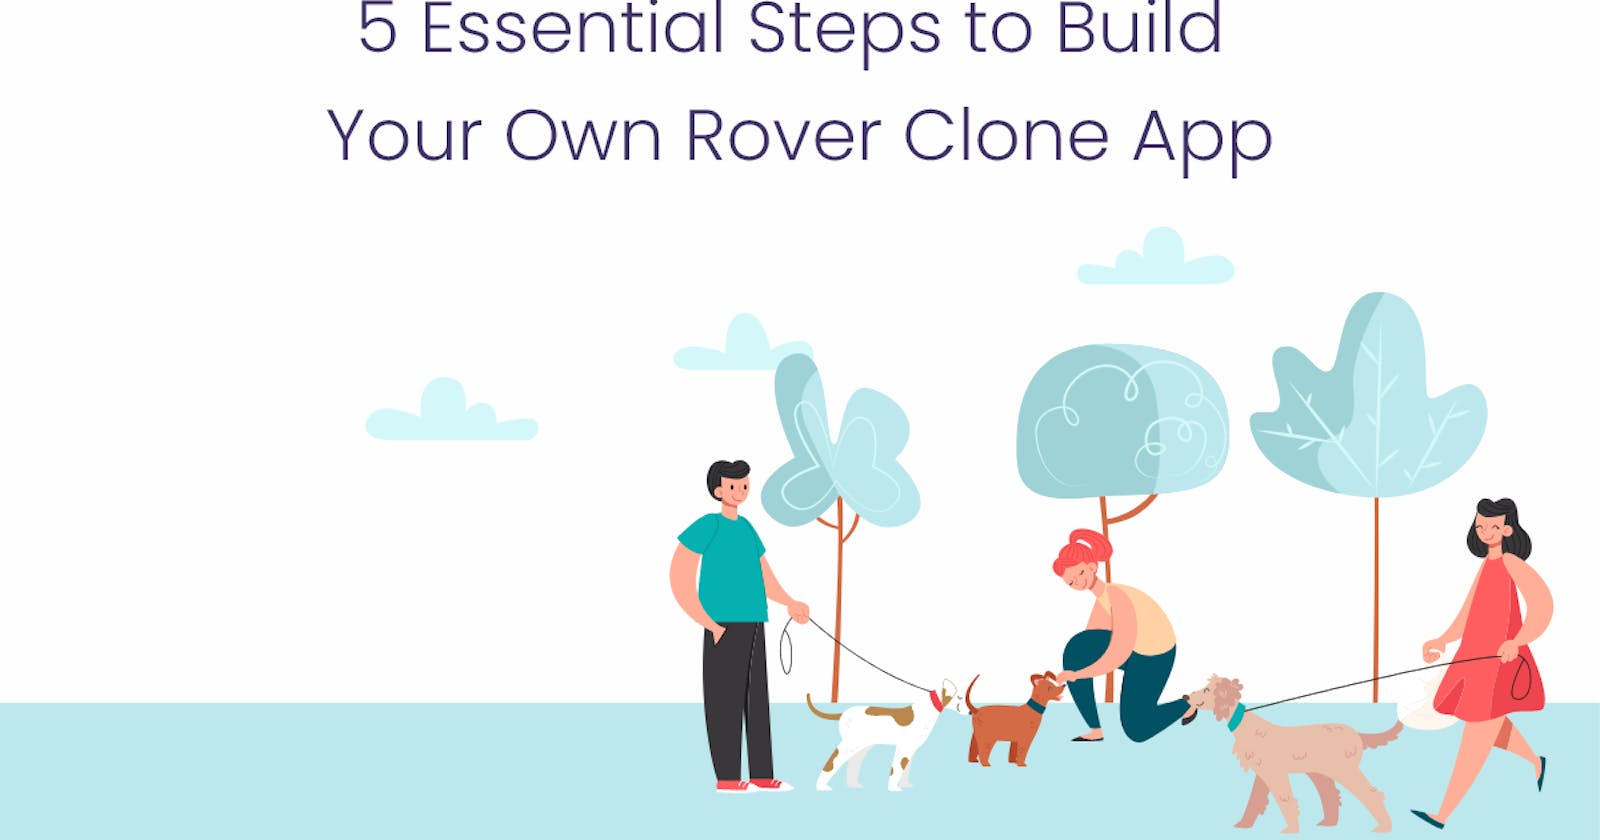 5 Essential Steps to Build Your Own Rover Clone App